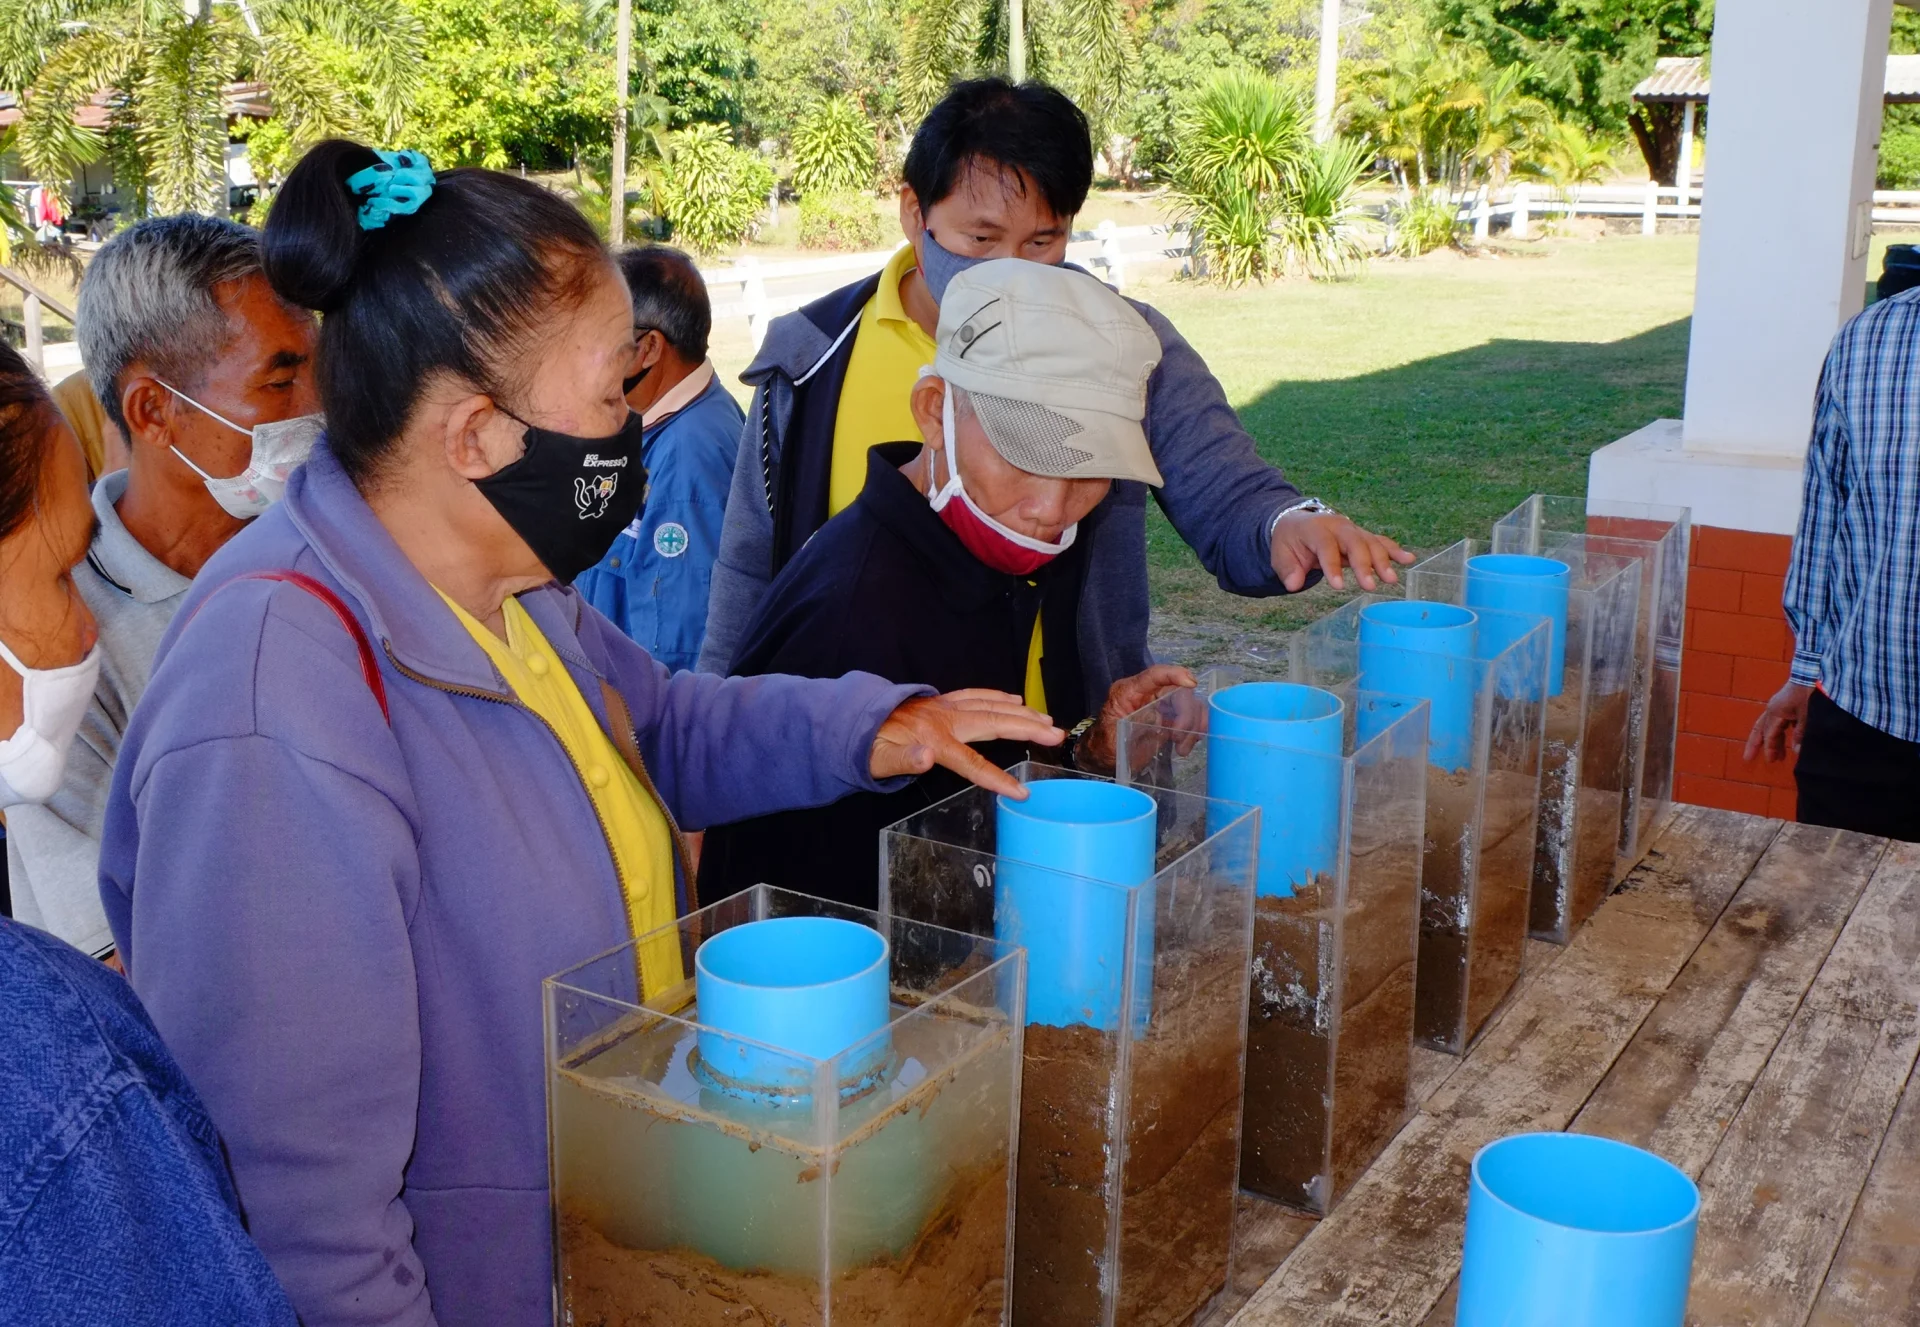 Thai farmers look at transparent containers filled with water and soil.